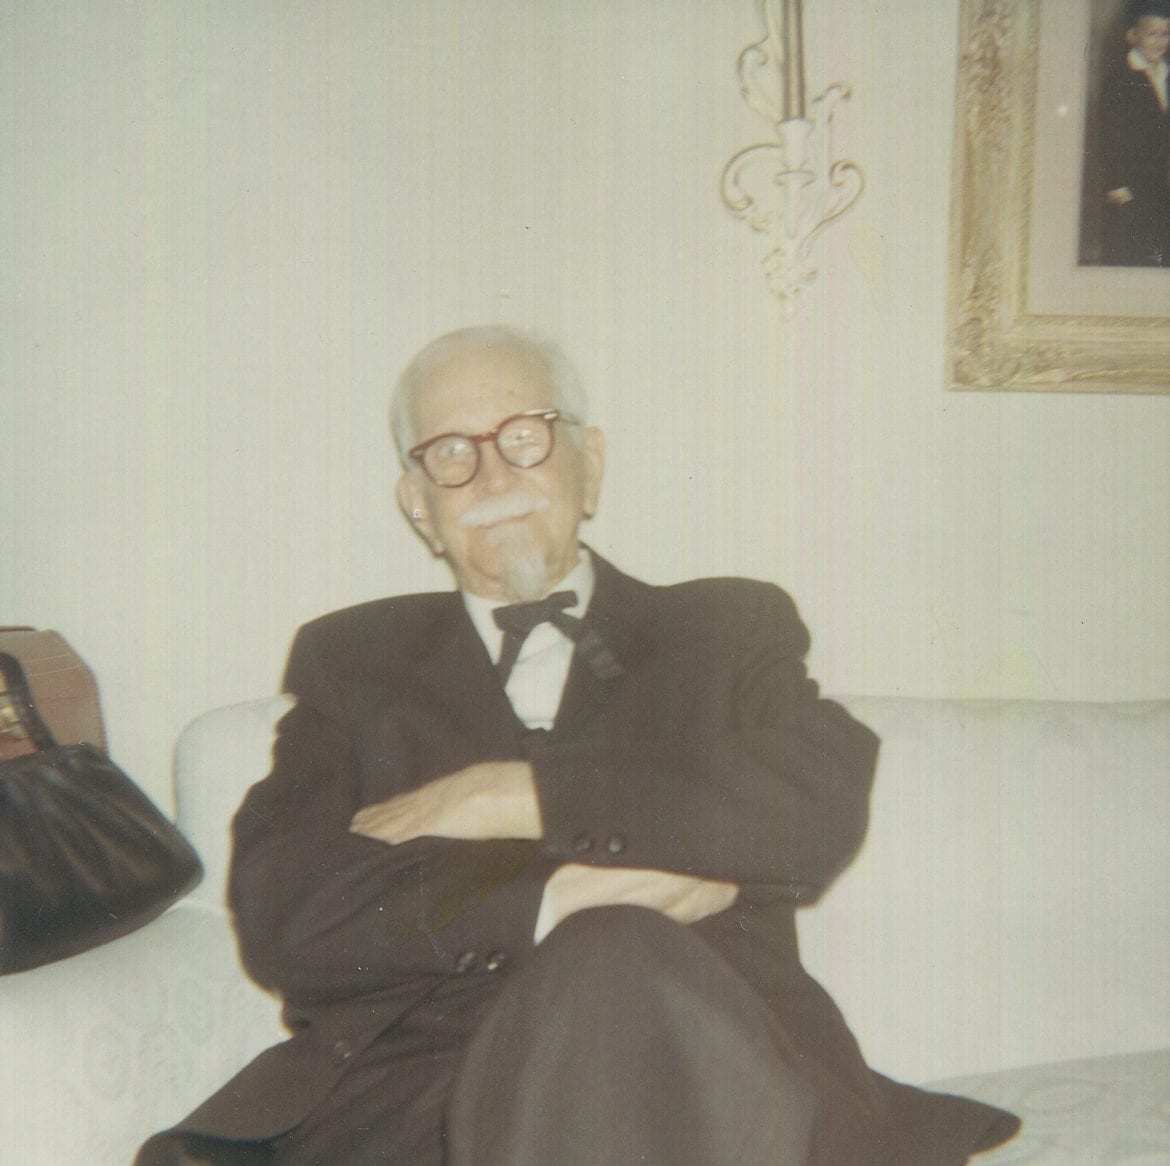 An old photo of a man in a living room.